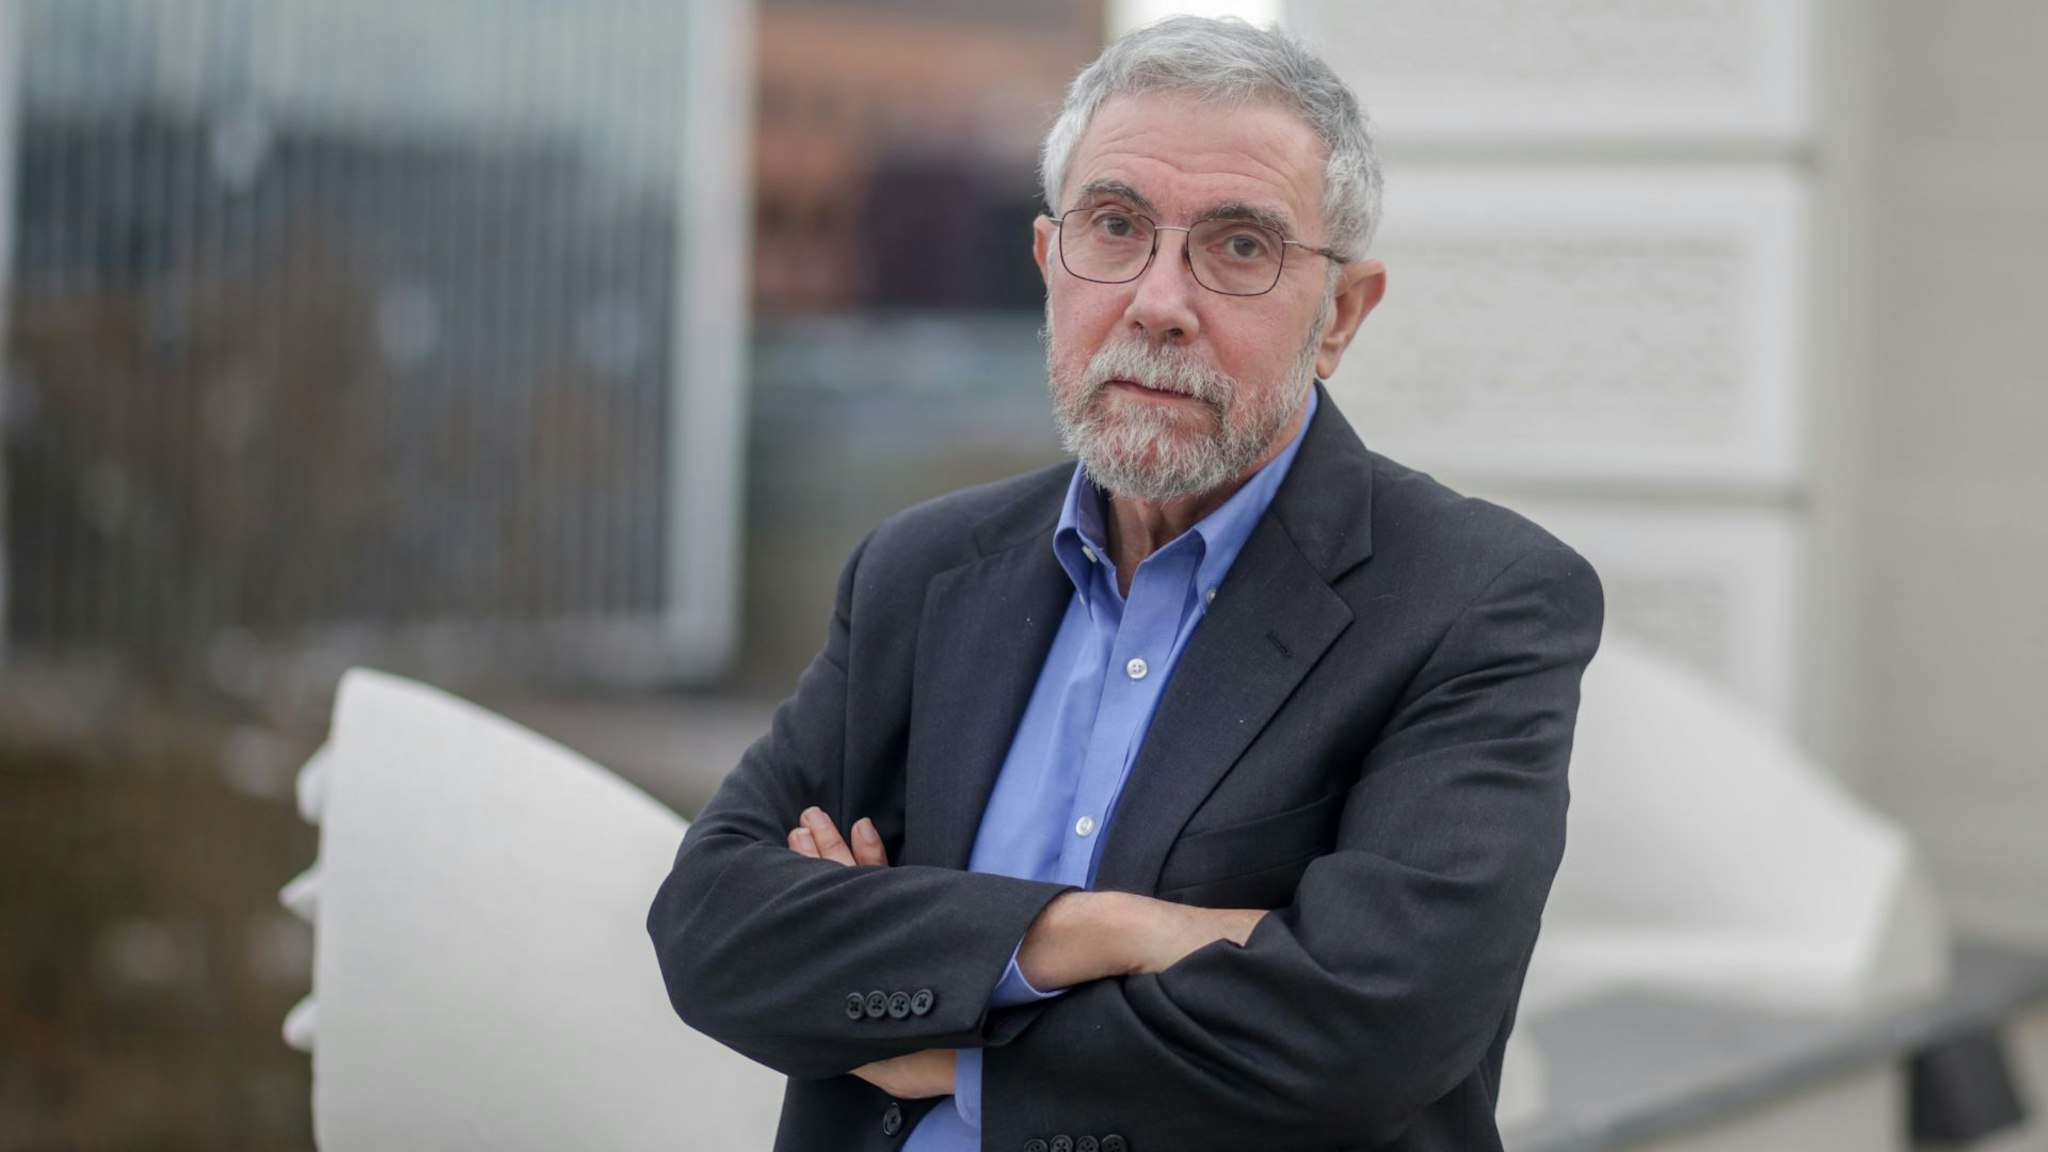 MADRID, SPAIN - FEBRUARY 17: The North American economist Paul Krugman, poses after an interview with Europa Press at the Rafael del Pino Foundation on February 17, 2020 in Madrid, Spain.